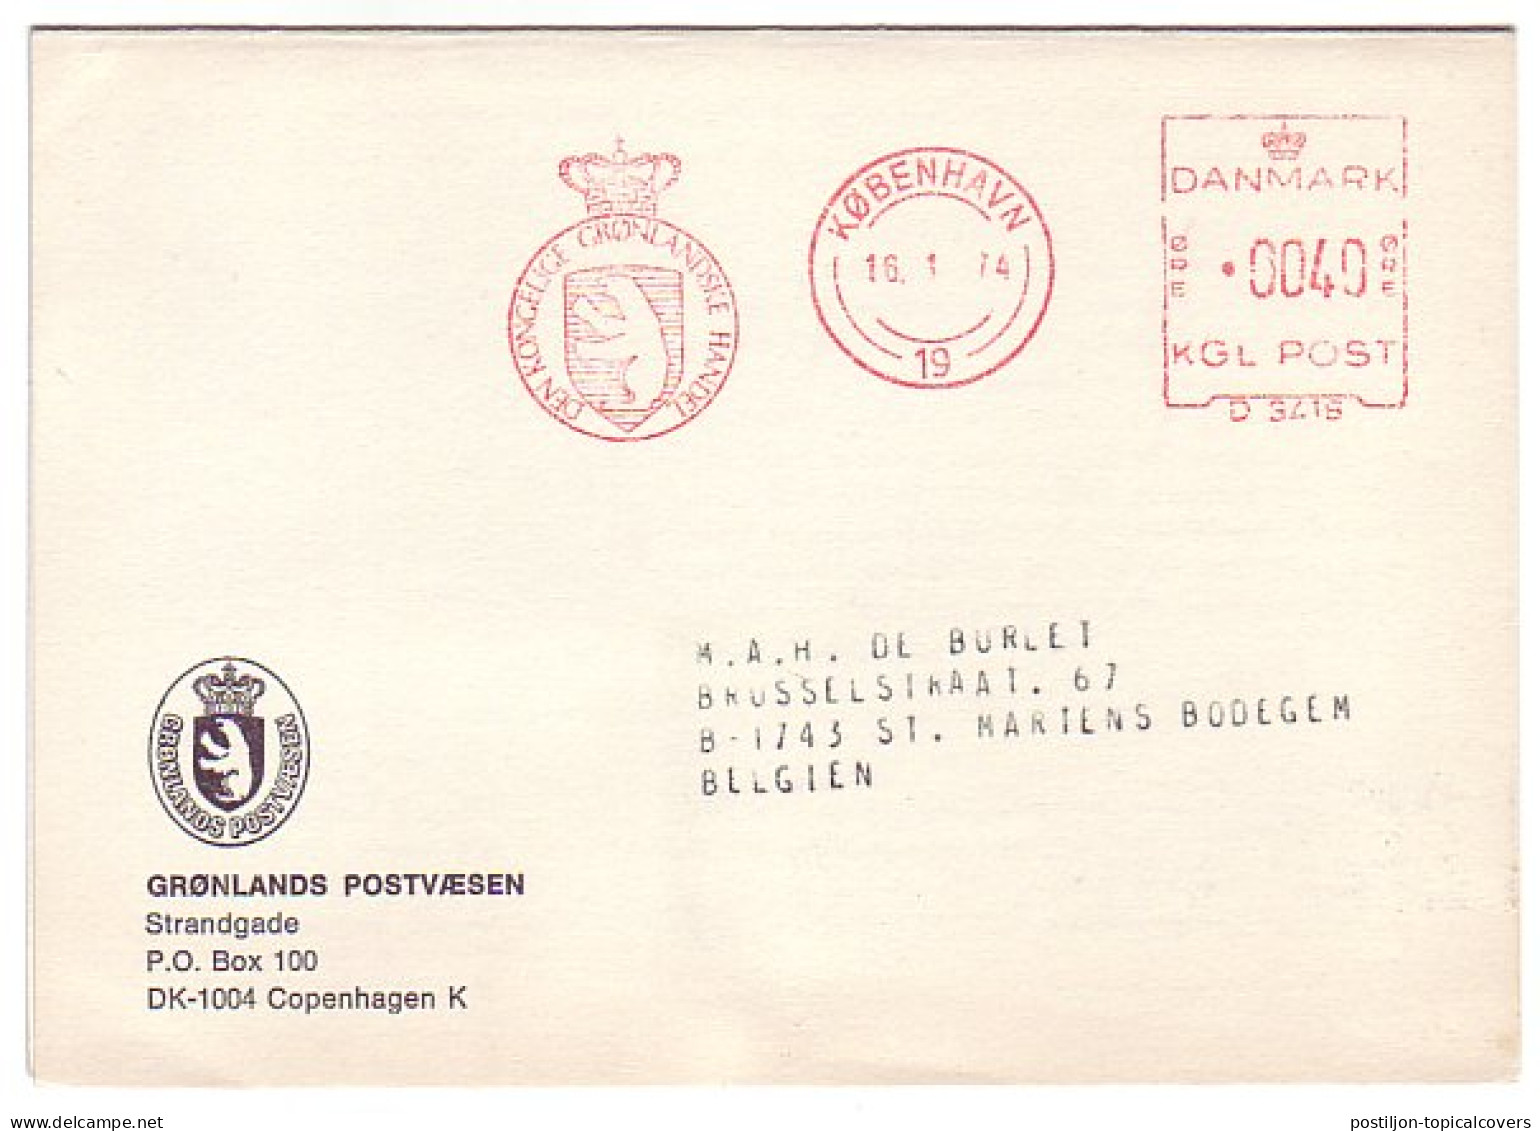 Meter Card Denmark 1974 Polar Bear - The Greenland Post Office - Arctic Expeditions